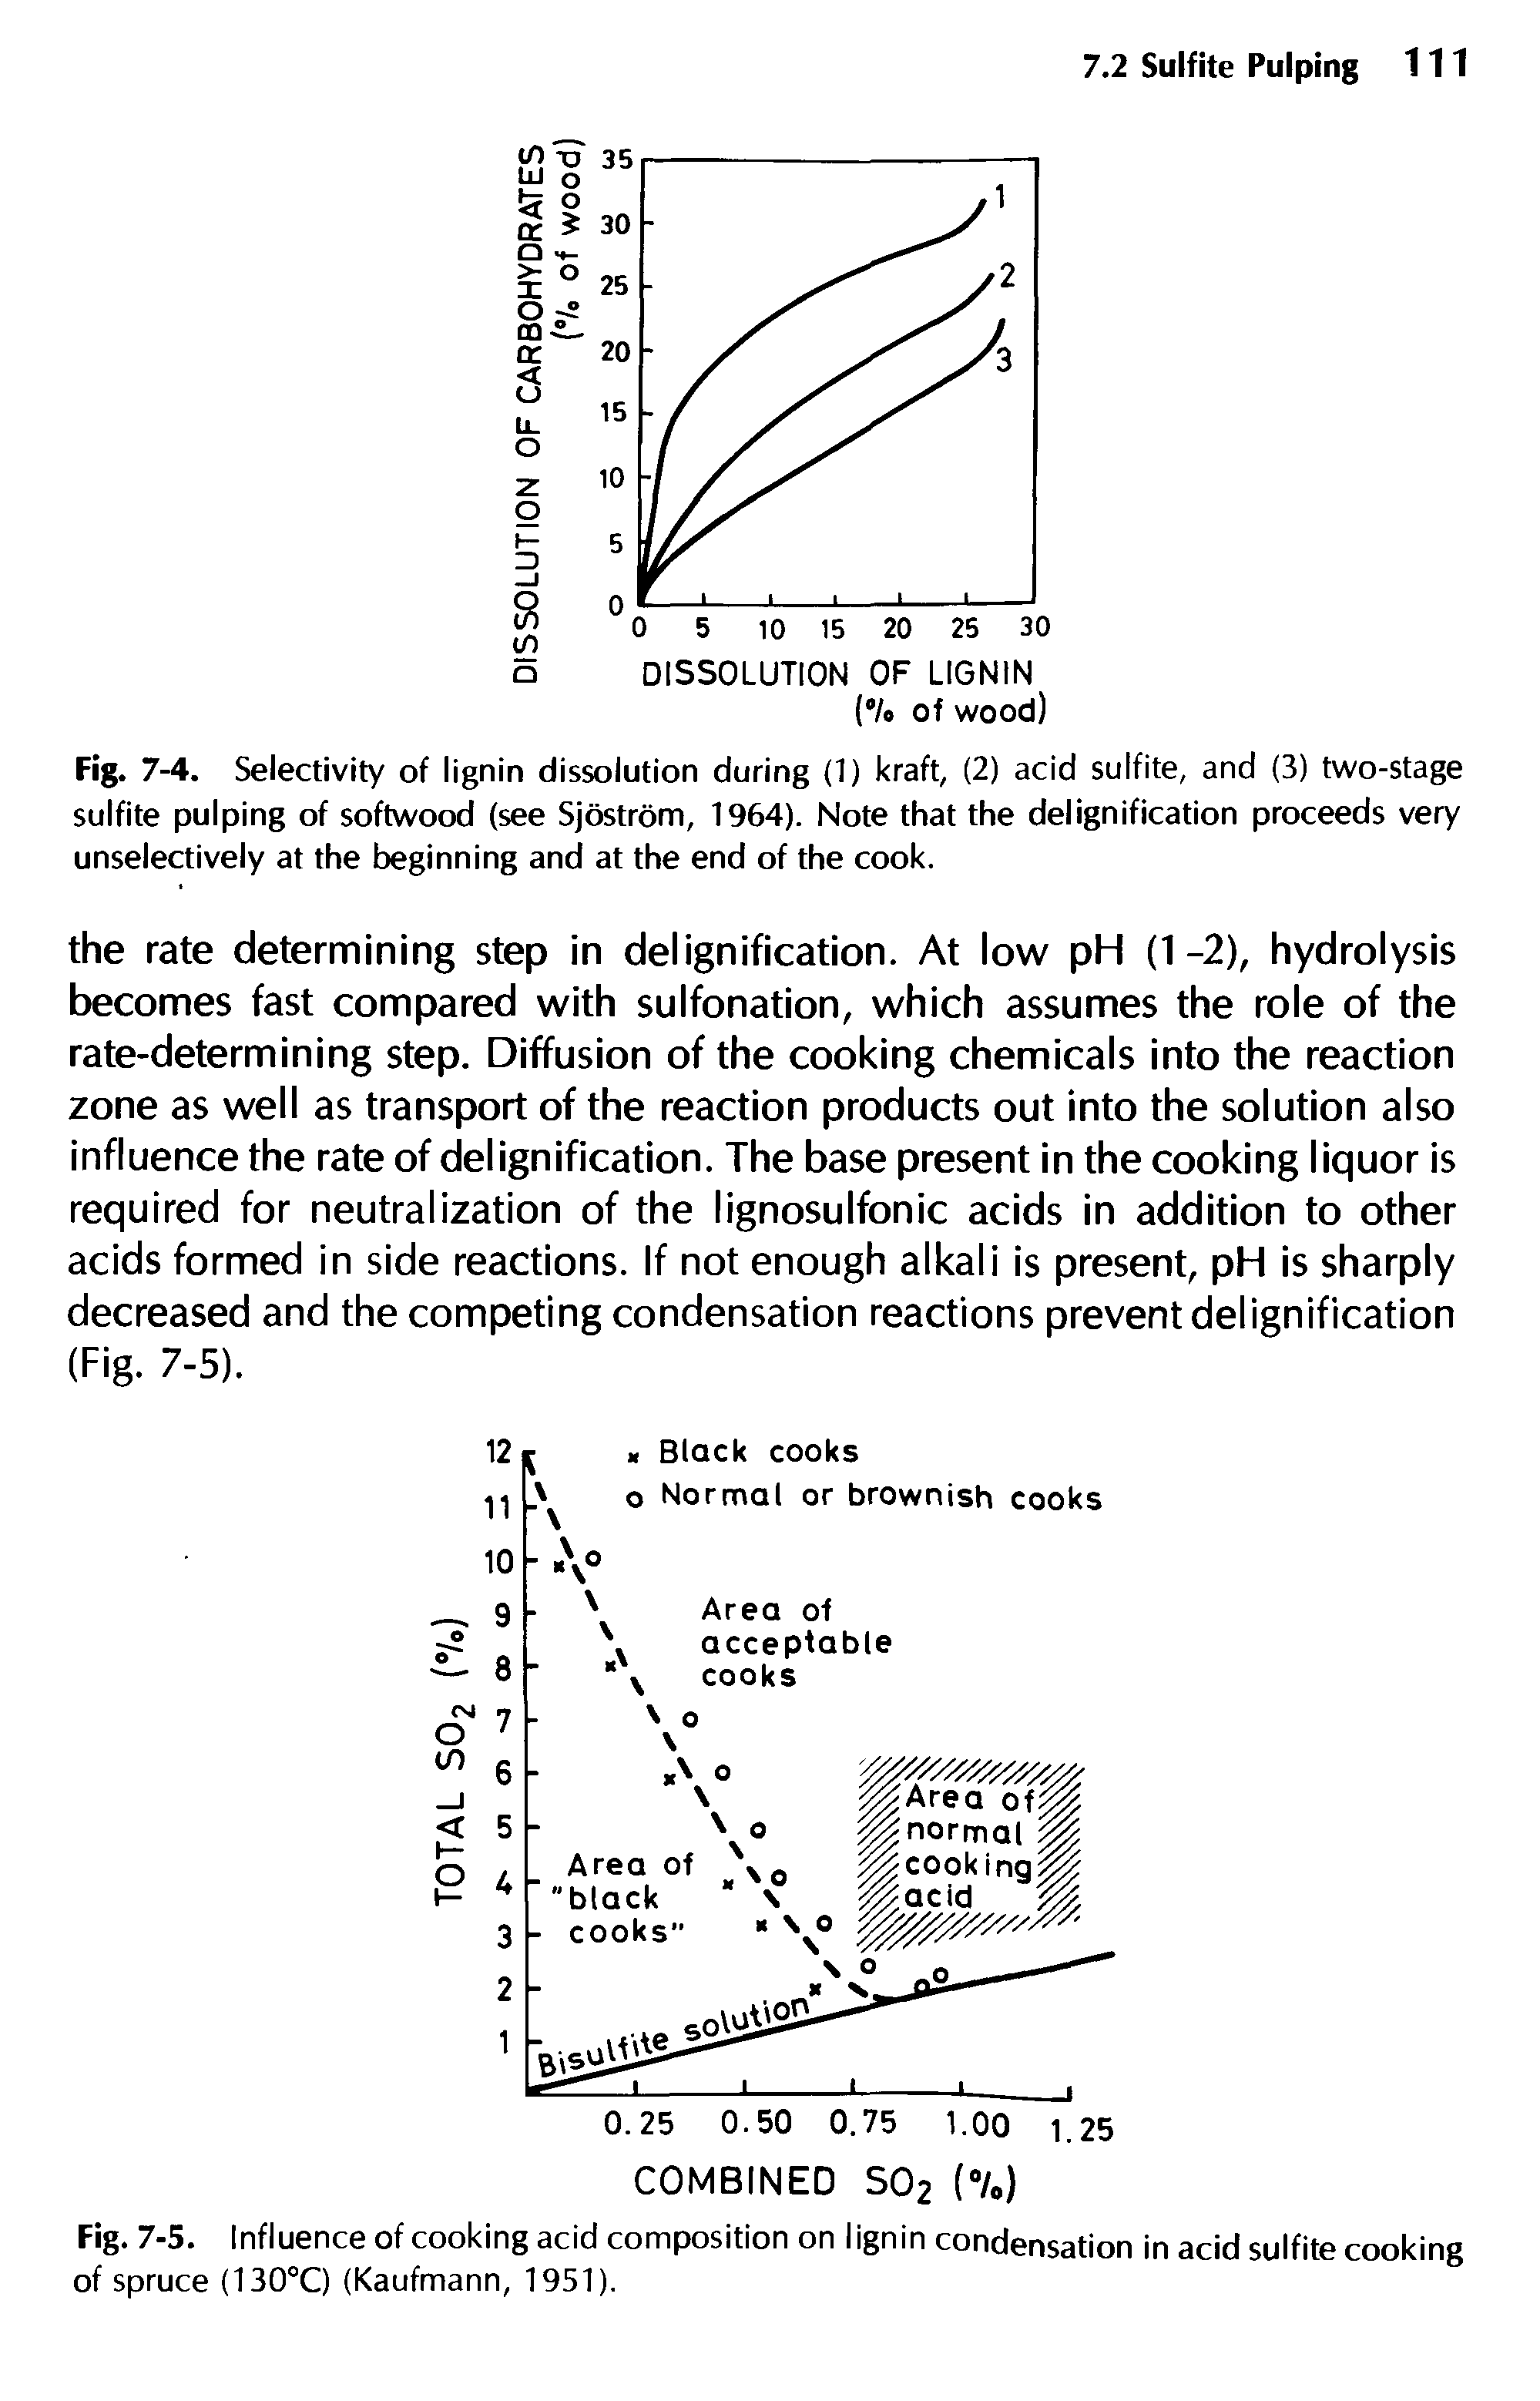 Fig. 7-5. Influence of cooking acid composition on lignin condensation in acid sulfite cooking of spruce (130°C) (Kaufmann, 1951).